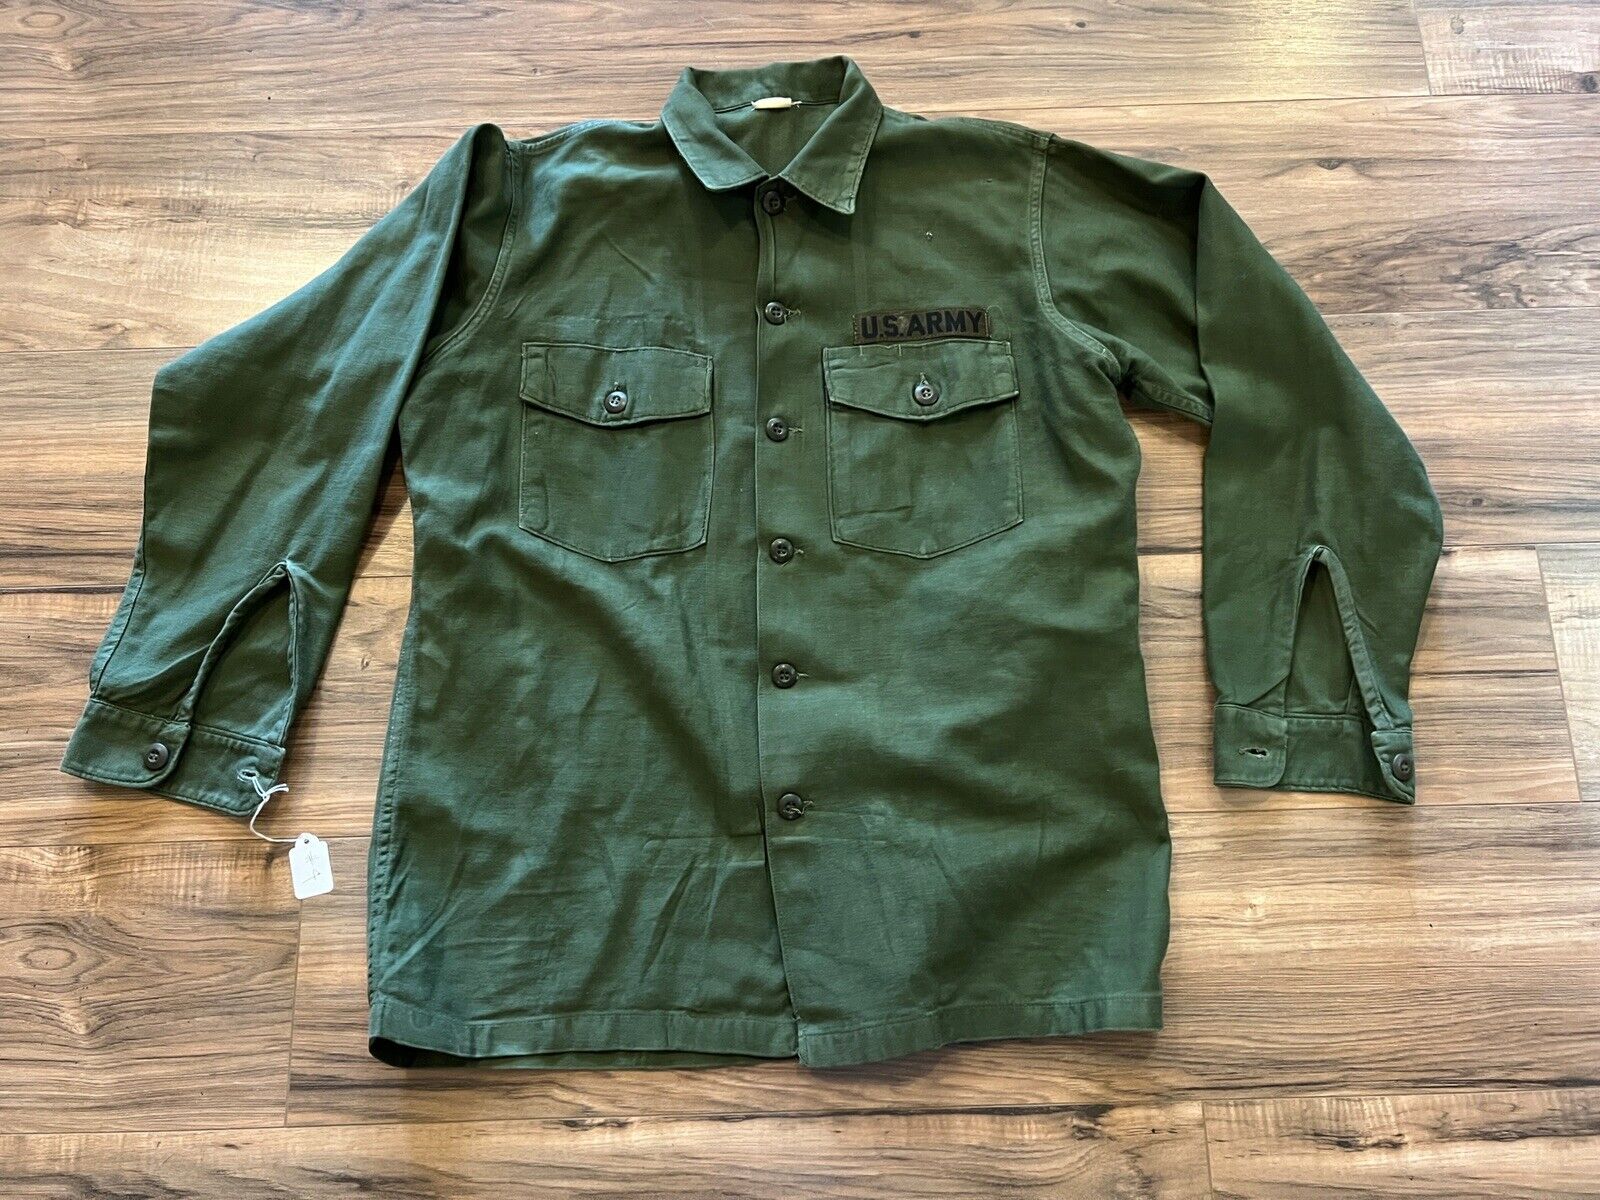 1970 US Army Issue Cotton Sateen Shirt Utility OG-107 Vietnam 16.5 x 34 #4